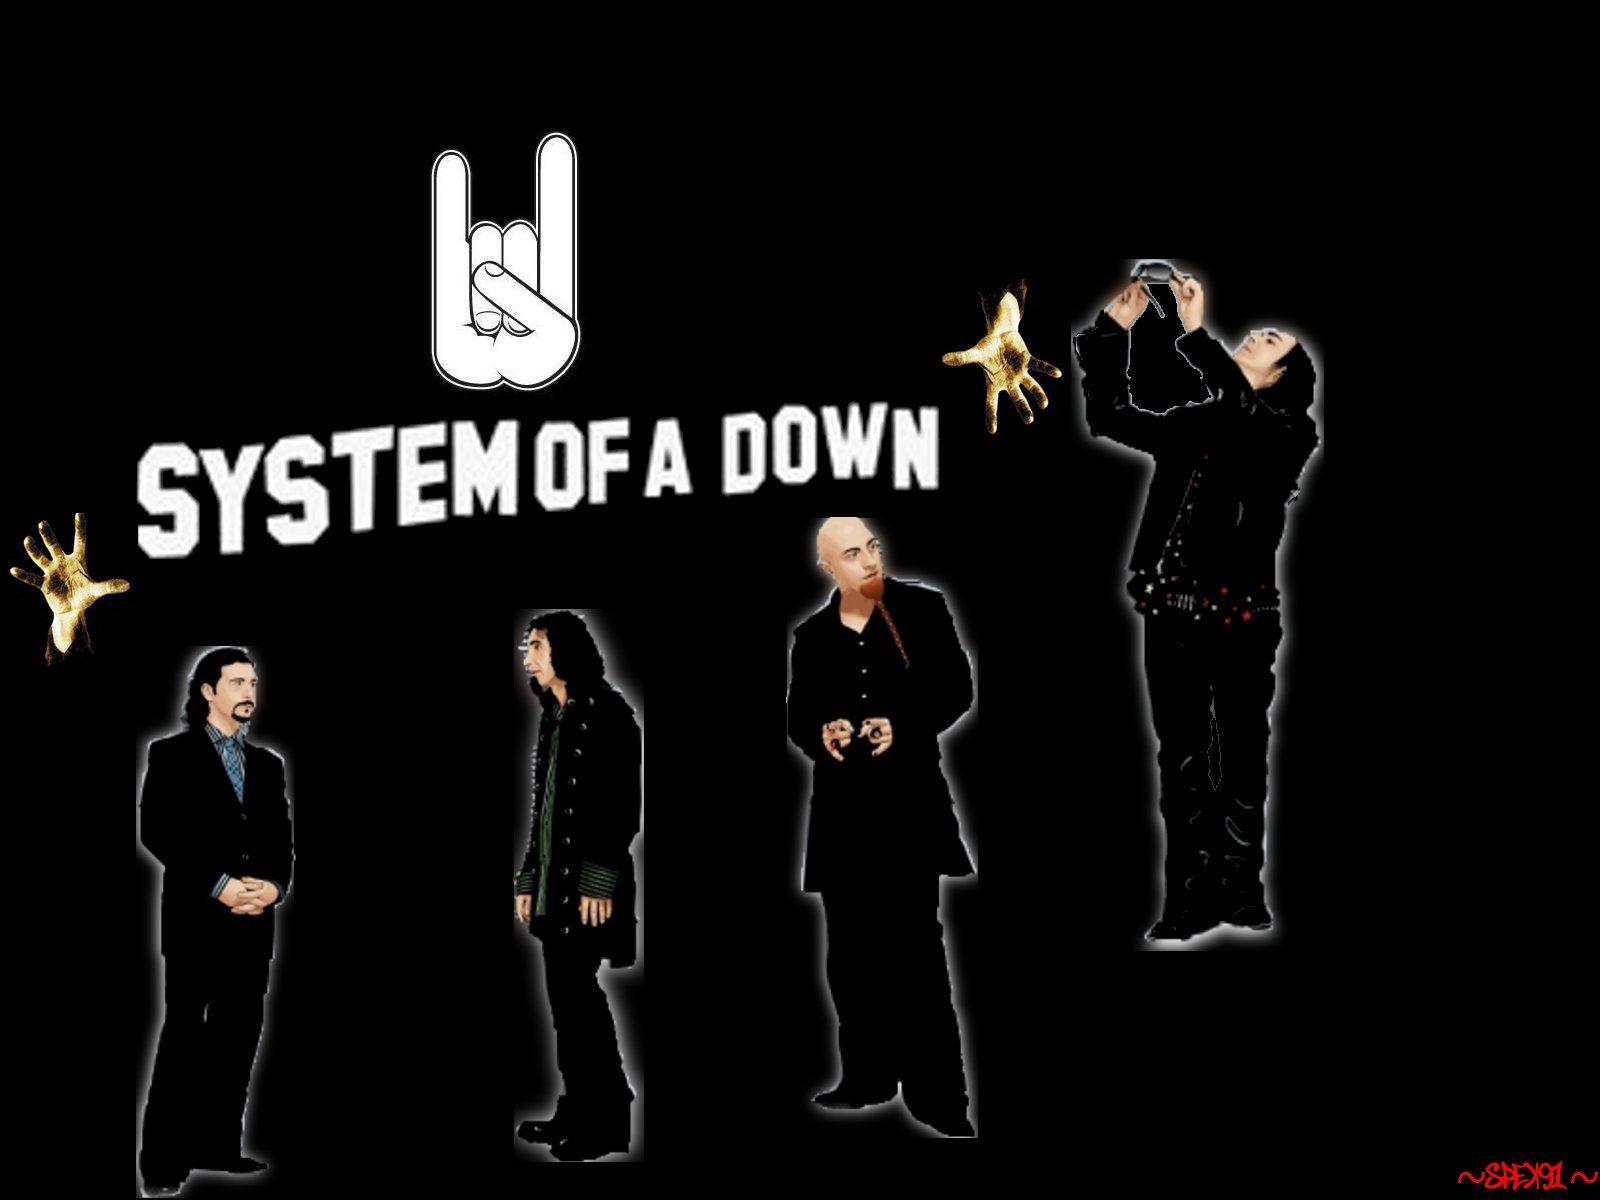 System of a down wallpaper